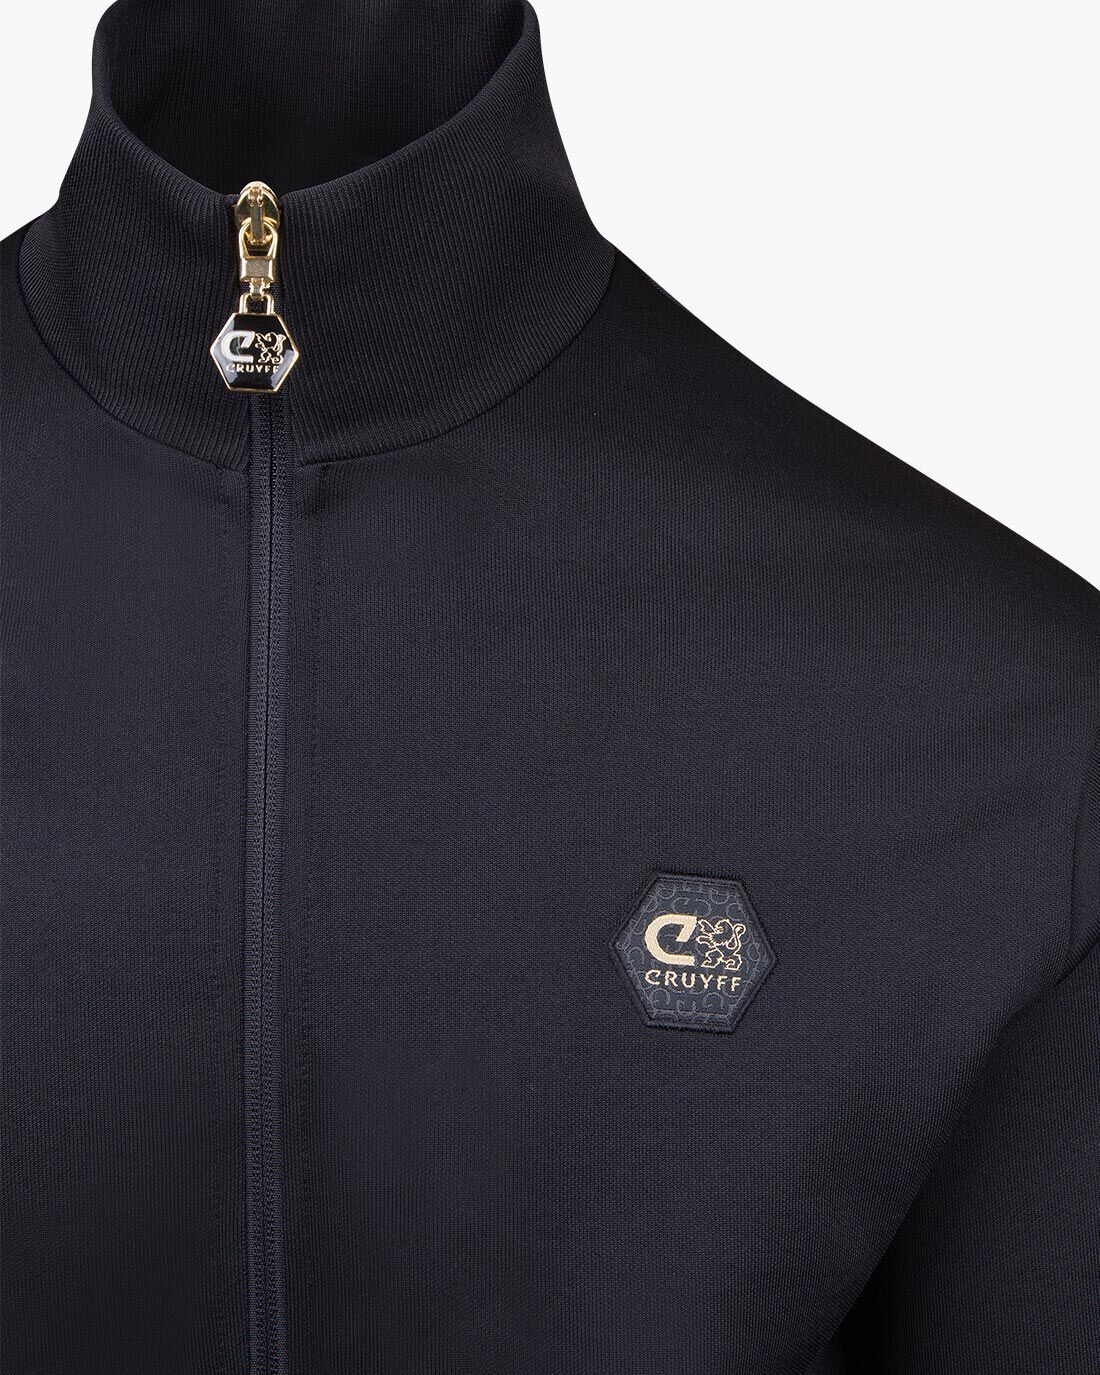 Details about   Cruyff Carreras Poly Track Top Black CA3300203490 